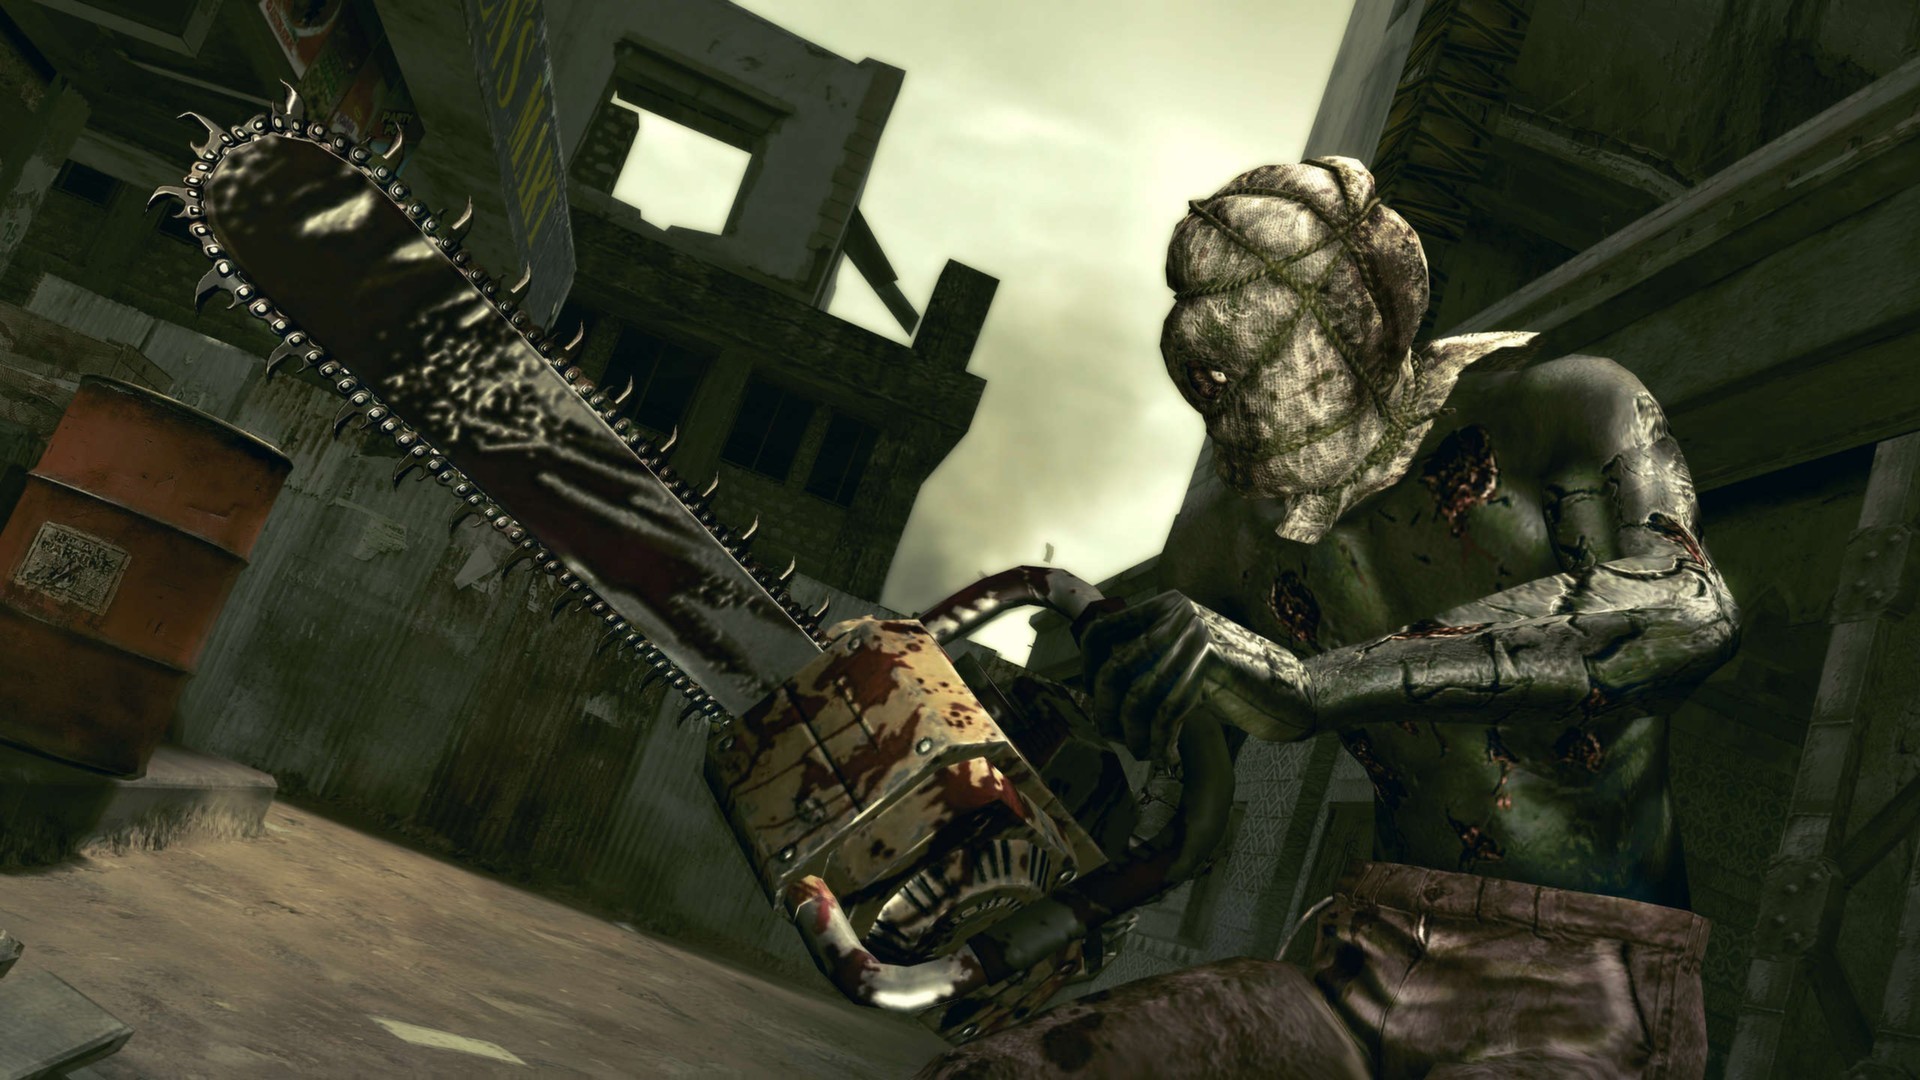 Resident Evil 5 PS4, Xbox One Release Date Confirmed, New Screenshots